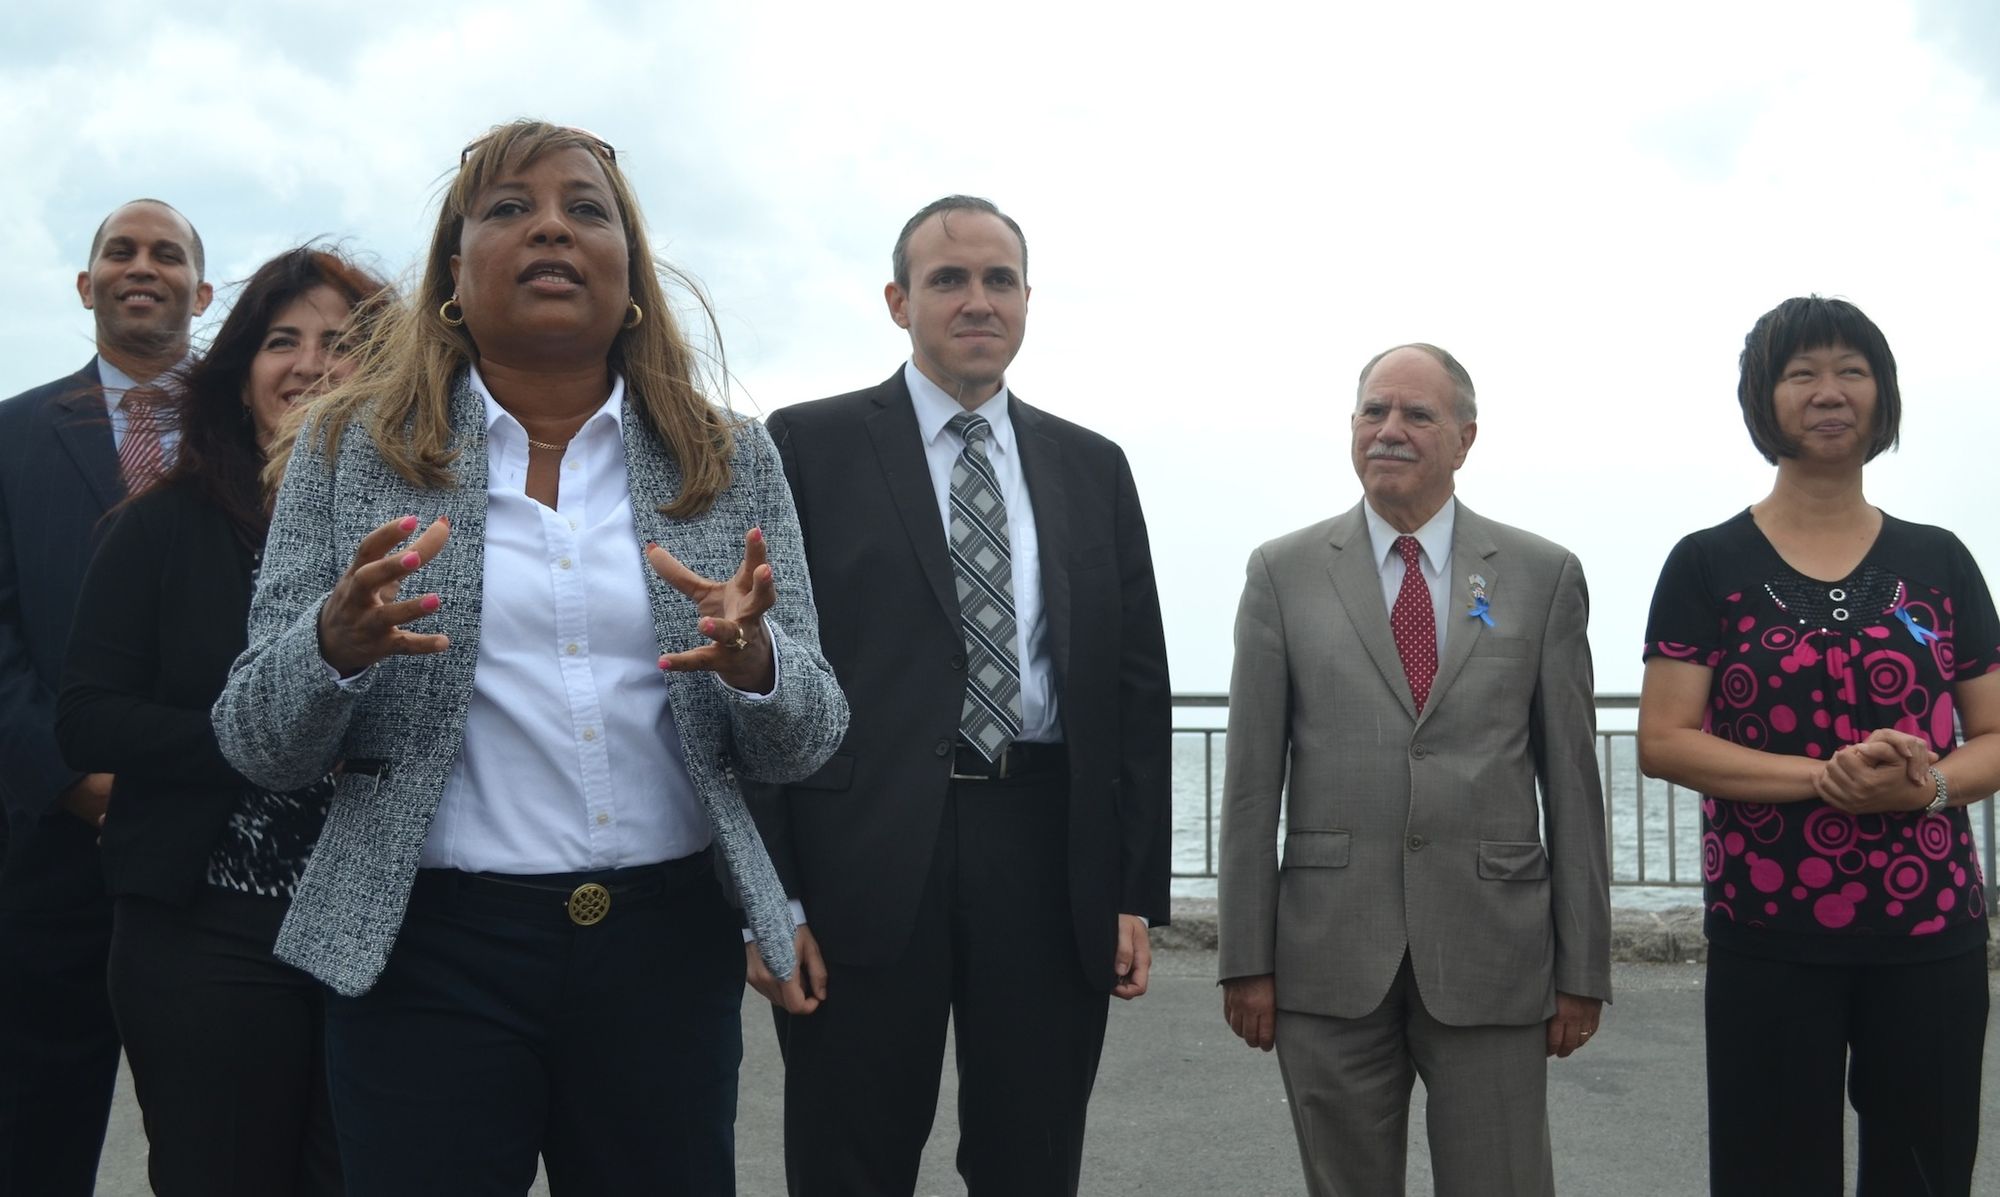 Pamela Harris speaking with her endorsers. From left to right: Congressman Hakeem Jeffries, State Senator Diane Savino, City Councilman Mark Treyger, Assemblyman William Colton, and Democratic Leader for the 47th Assembly District Nancy Tong.